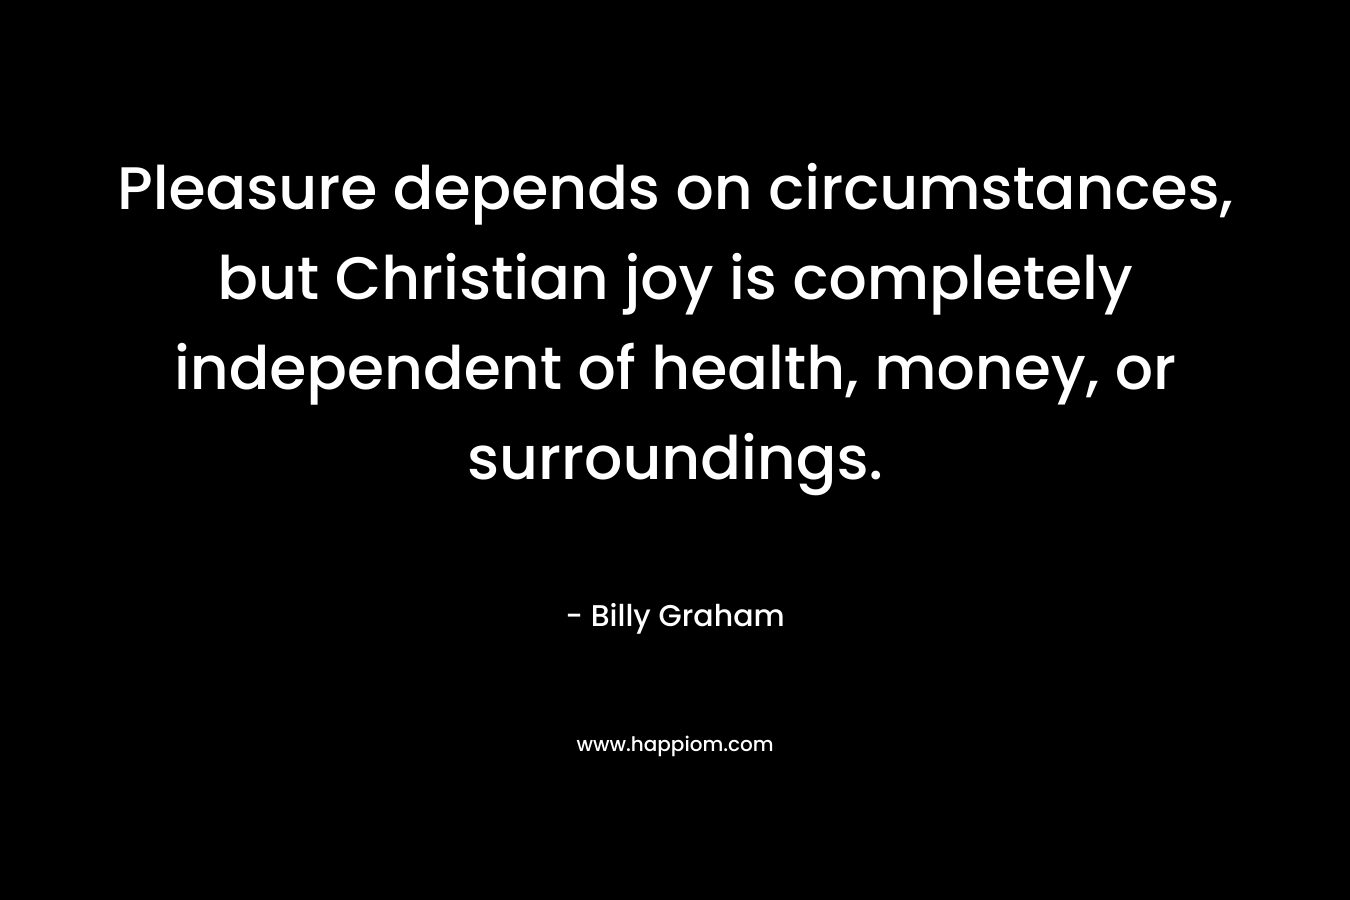 Pleasure depends on circumstances, but Christian joy is completely independent of health, money, or surroundings.